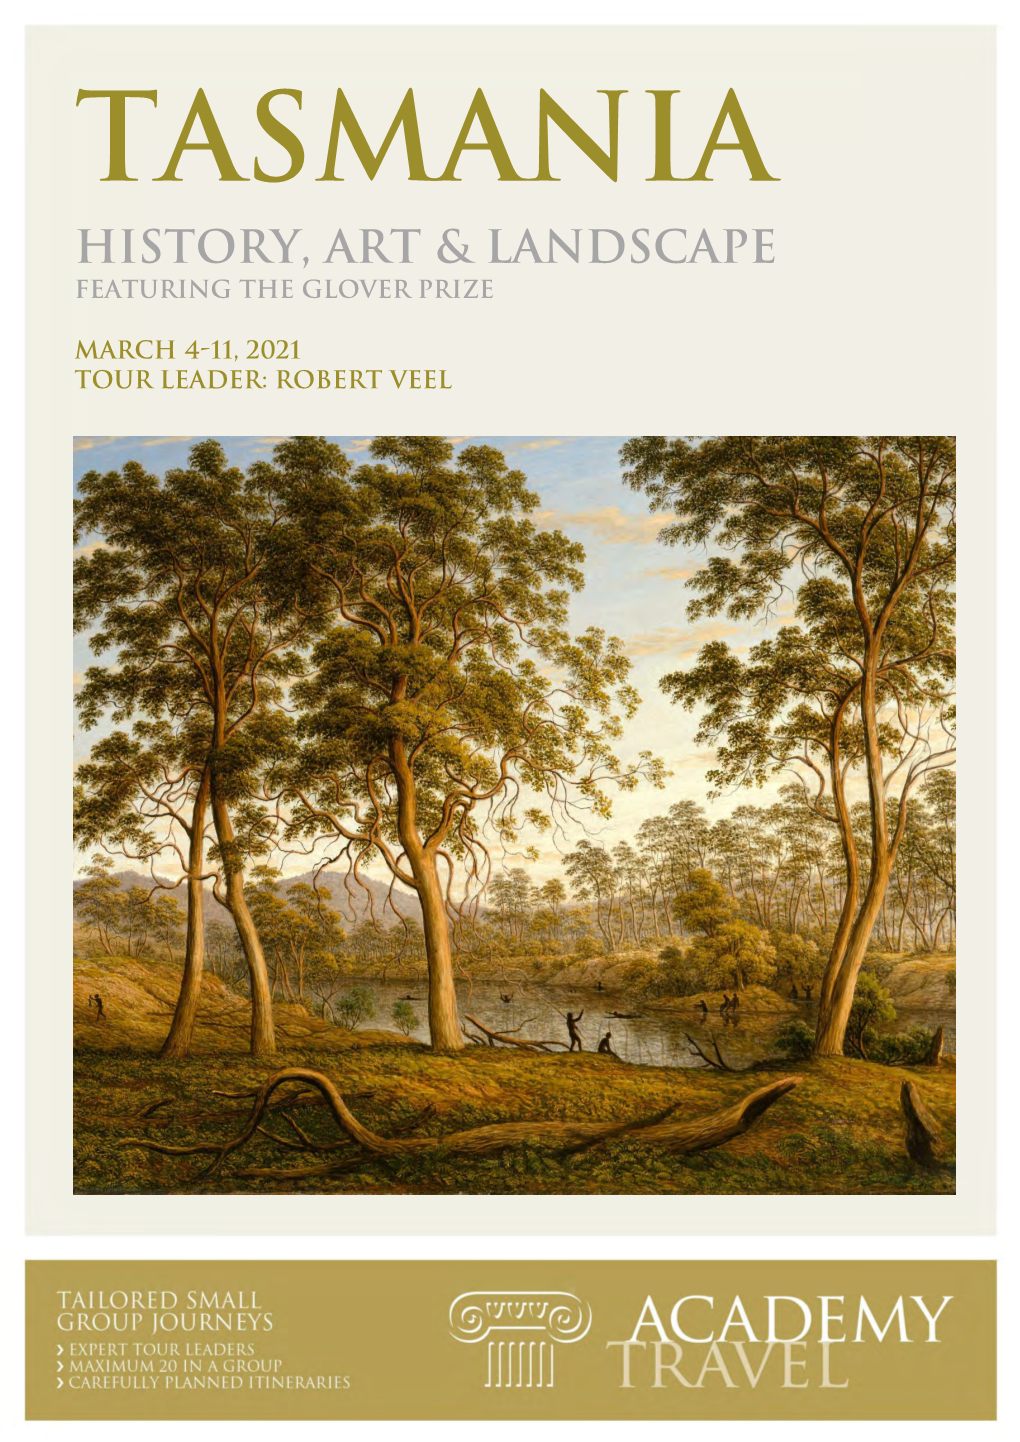 Tasmania History, Art & Landscape Featuring the Glover Prize